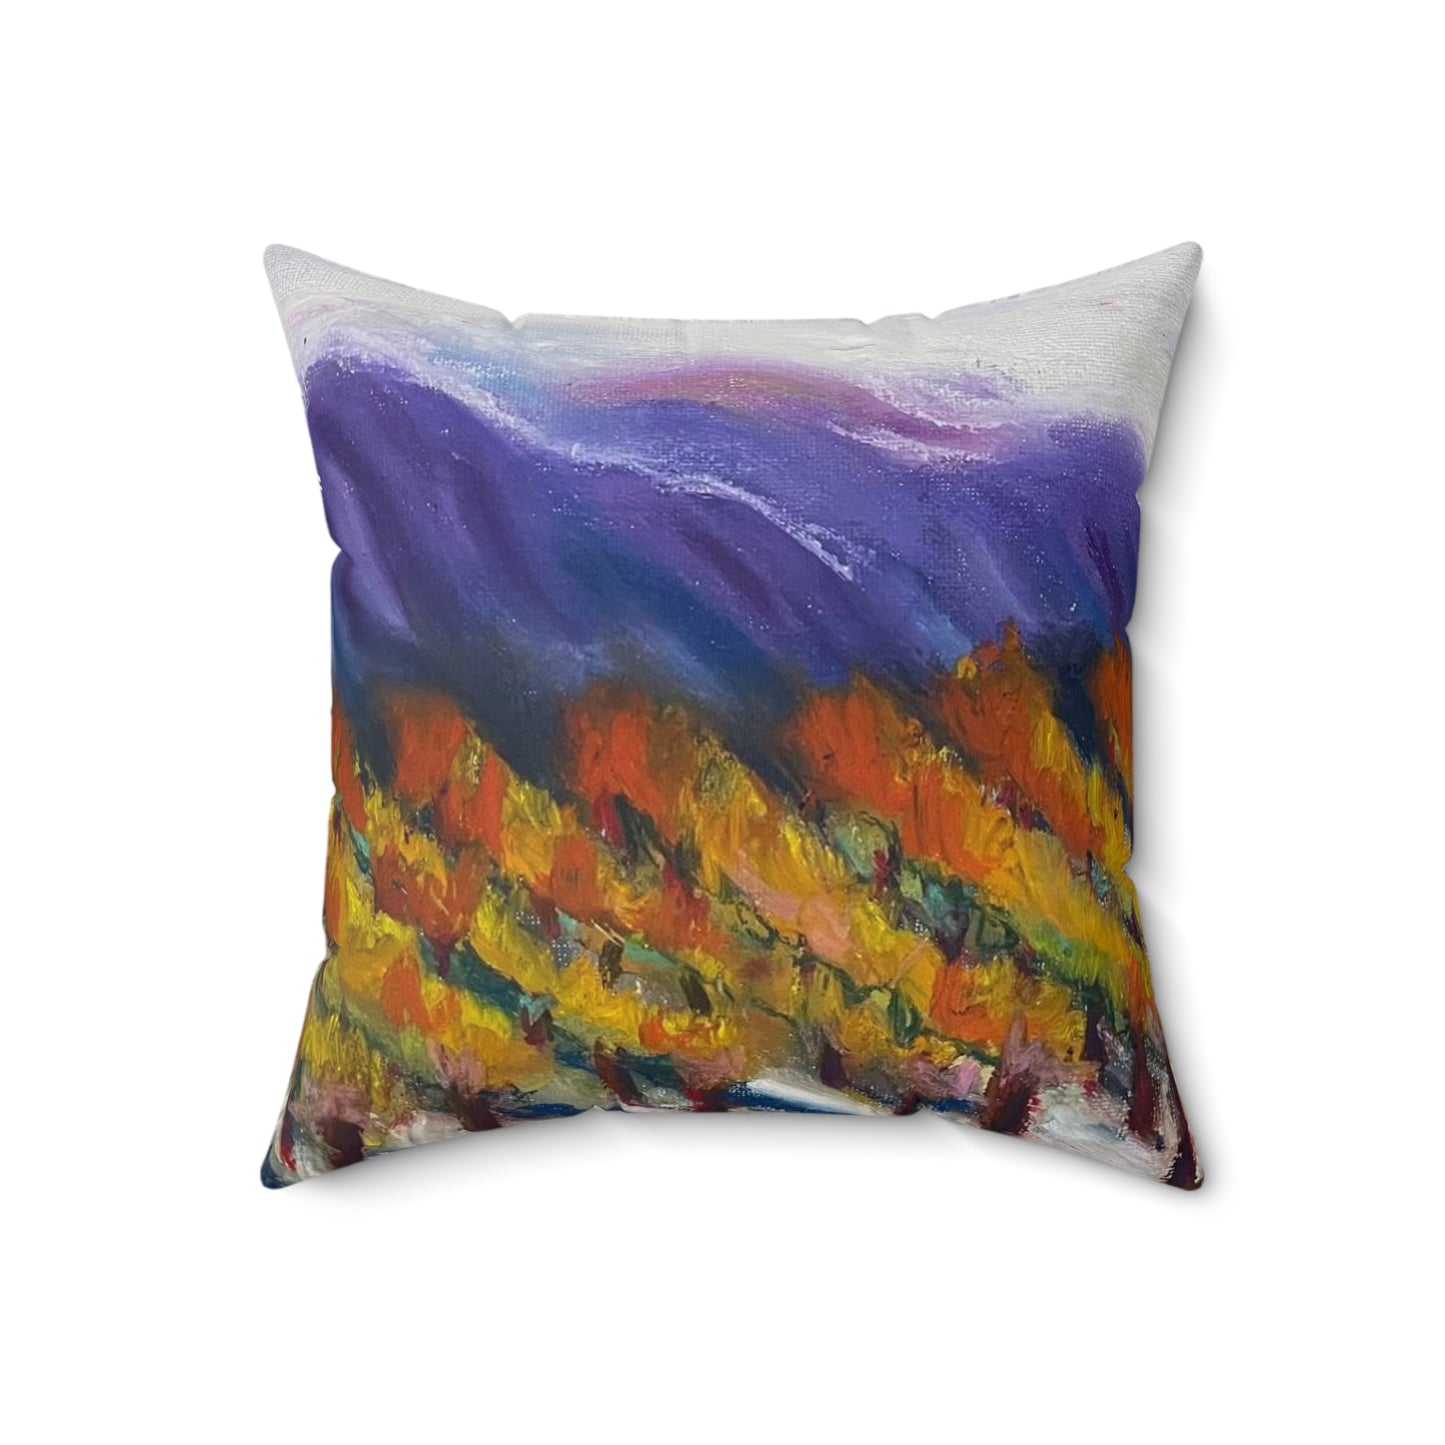 Misty Vines Indoor Spun Polyester Square Pillow